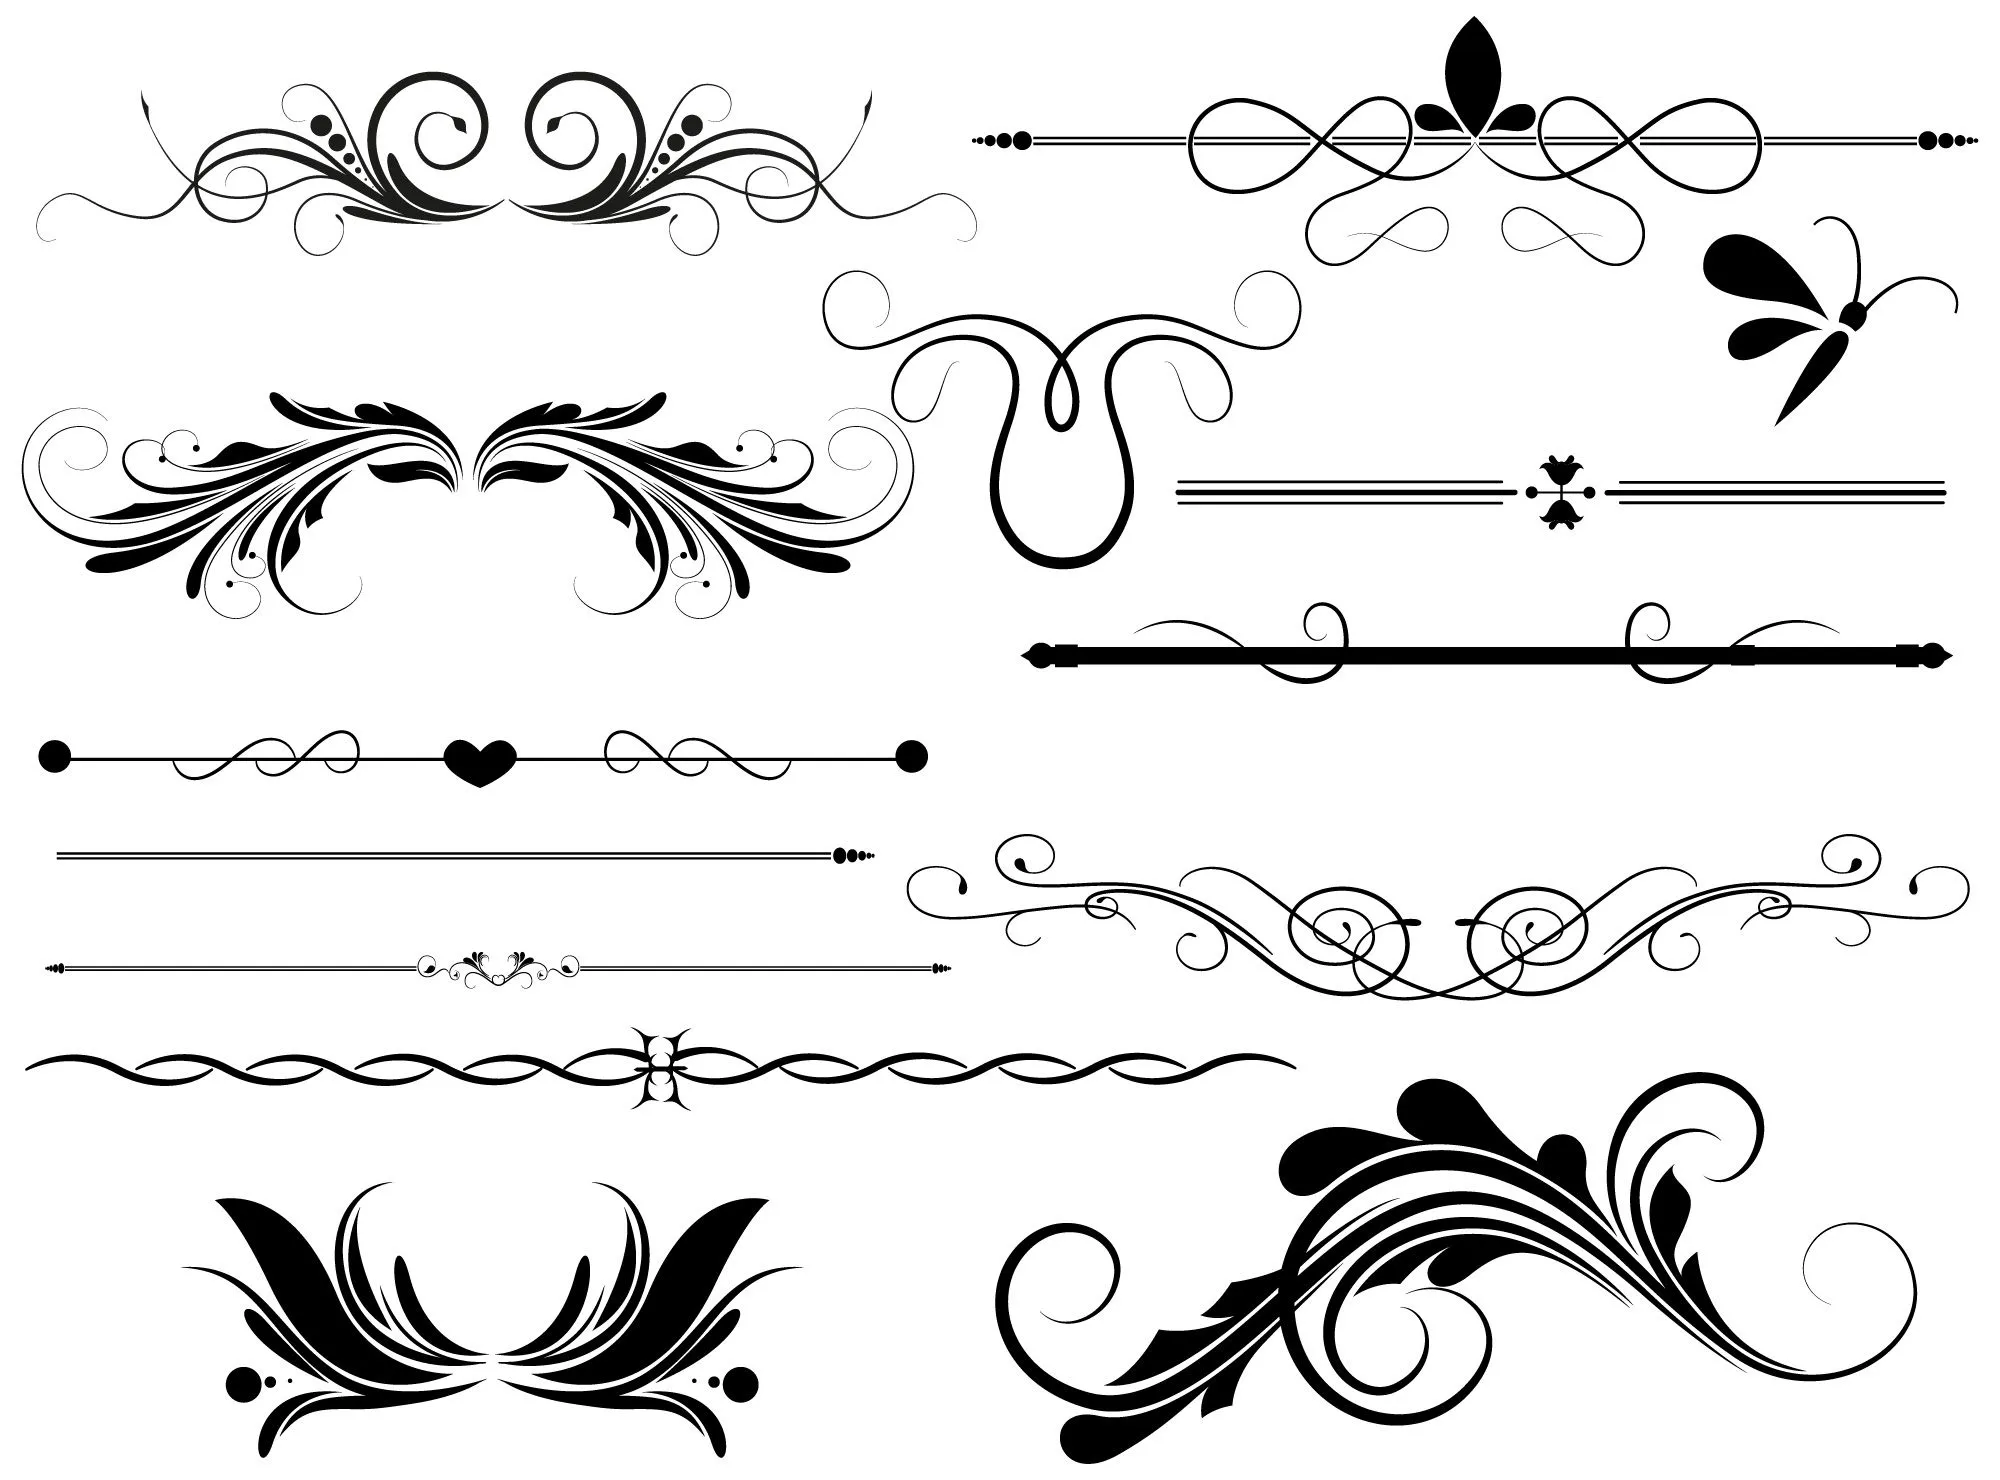  ... Page Decoration Vectors Designs Brushes, Shapes & PNG | Free Photoshop